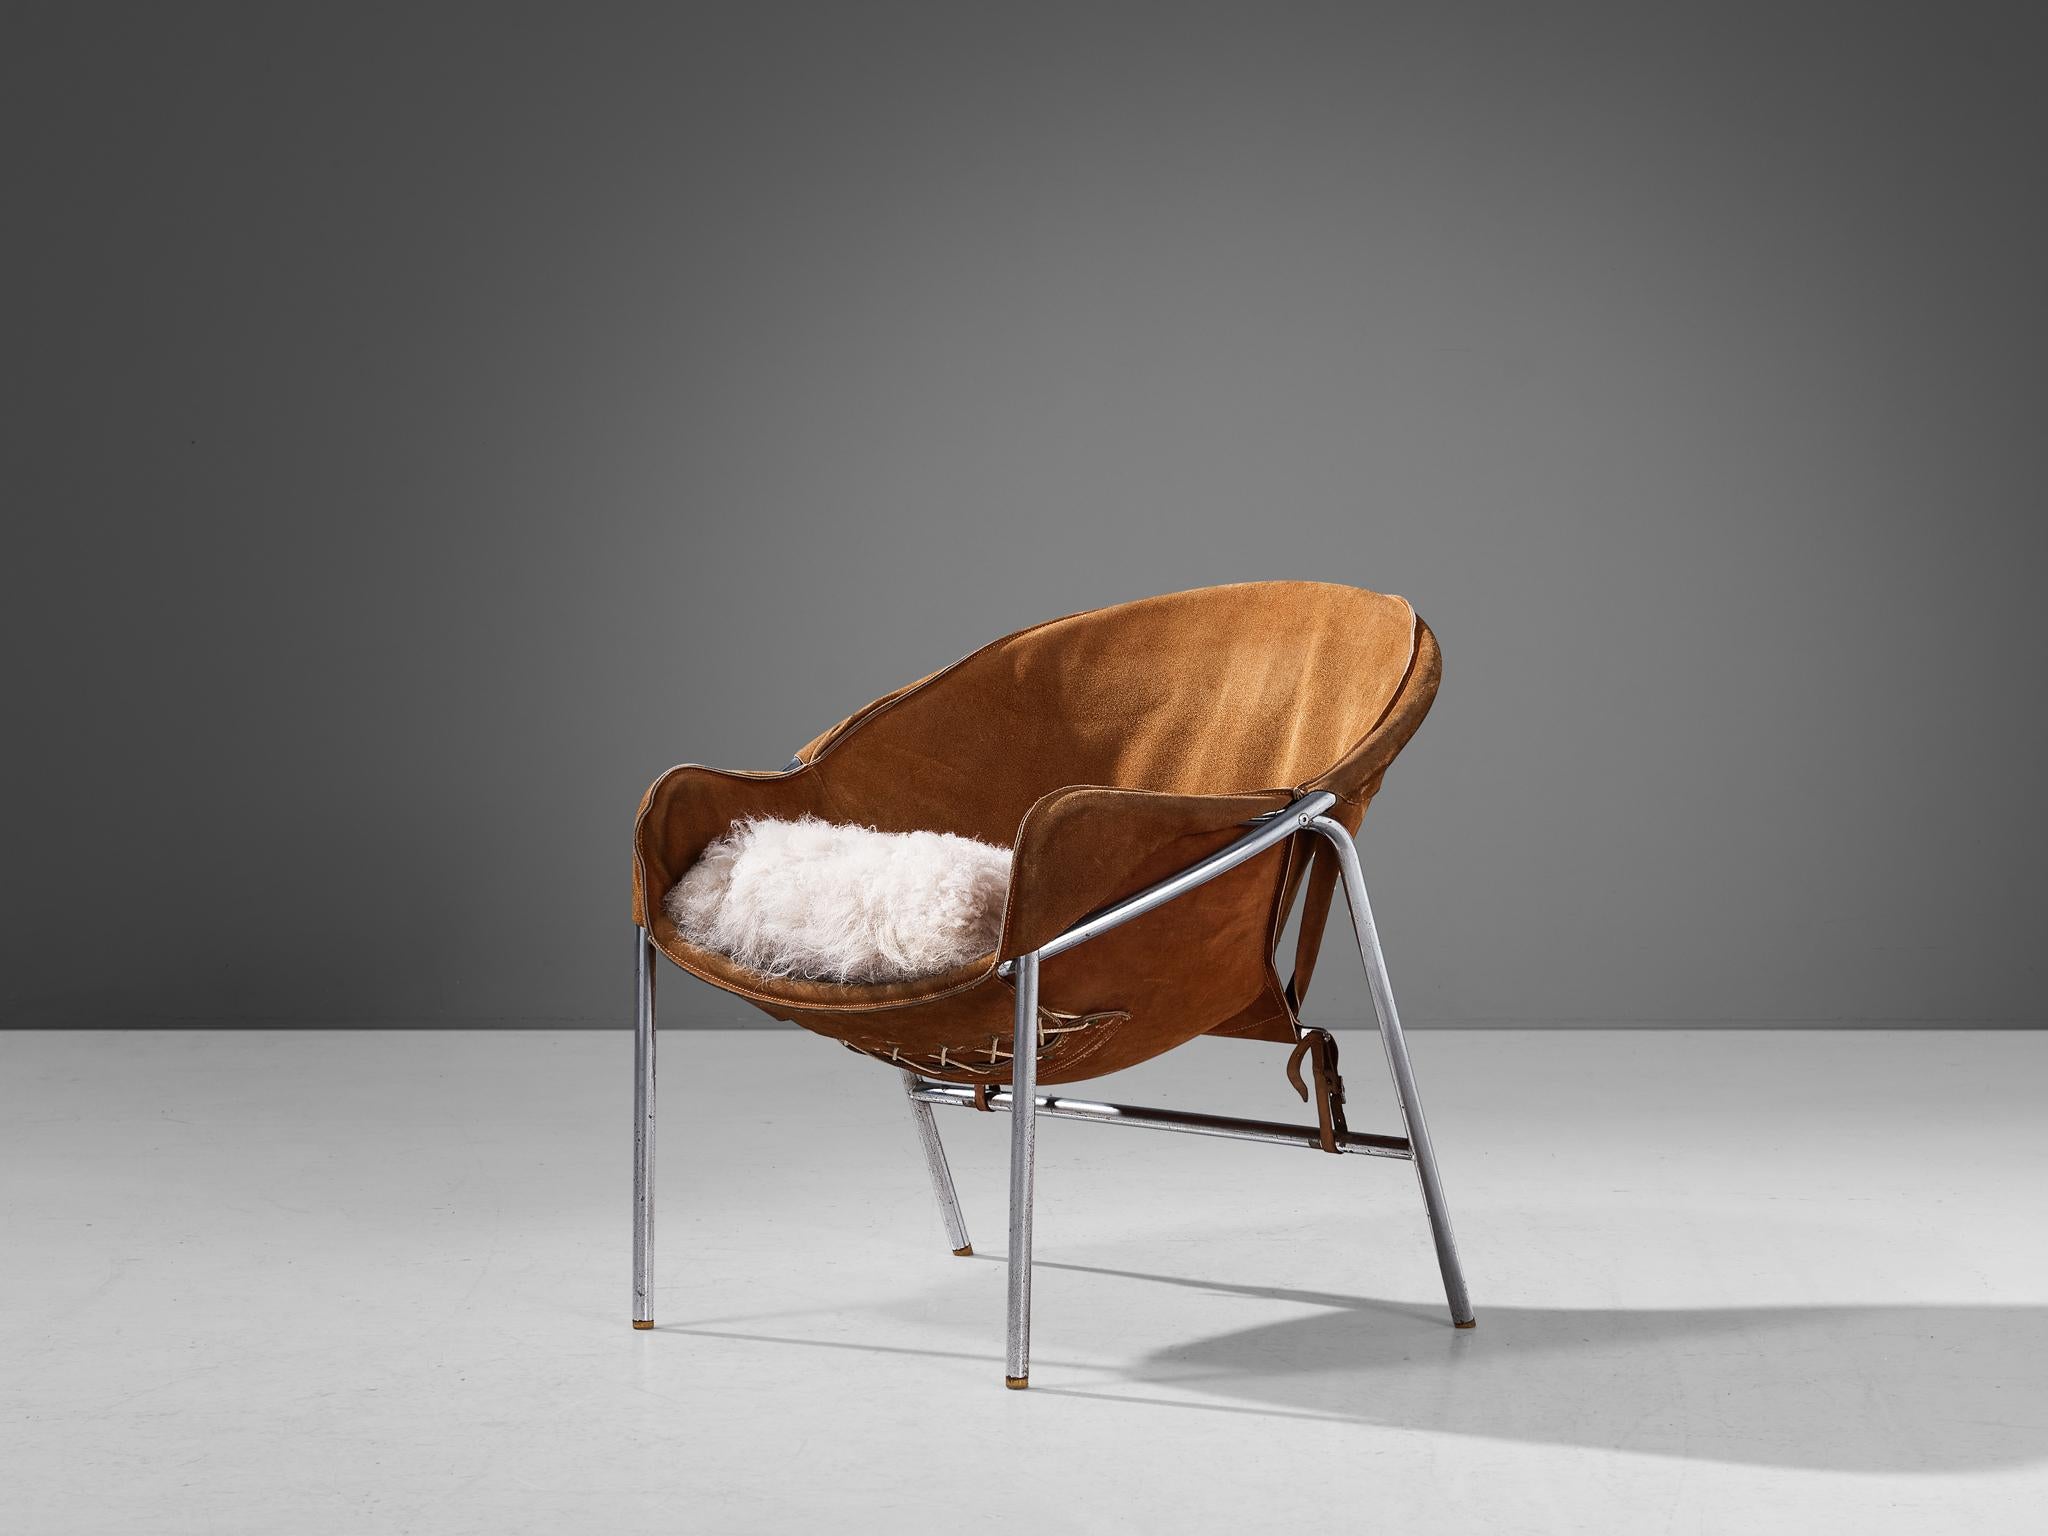 Erik Jørgensen, lounge chair model BO361, chromed metal, suede, wool, rope, brass, Denmark, design 1953

This design by Erik Jørgensen epitomizes a splendid construction featuring a ball-shaped seating that is attached to a stabile frame in chromed